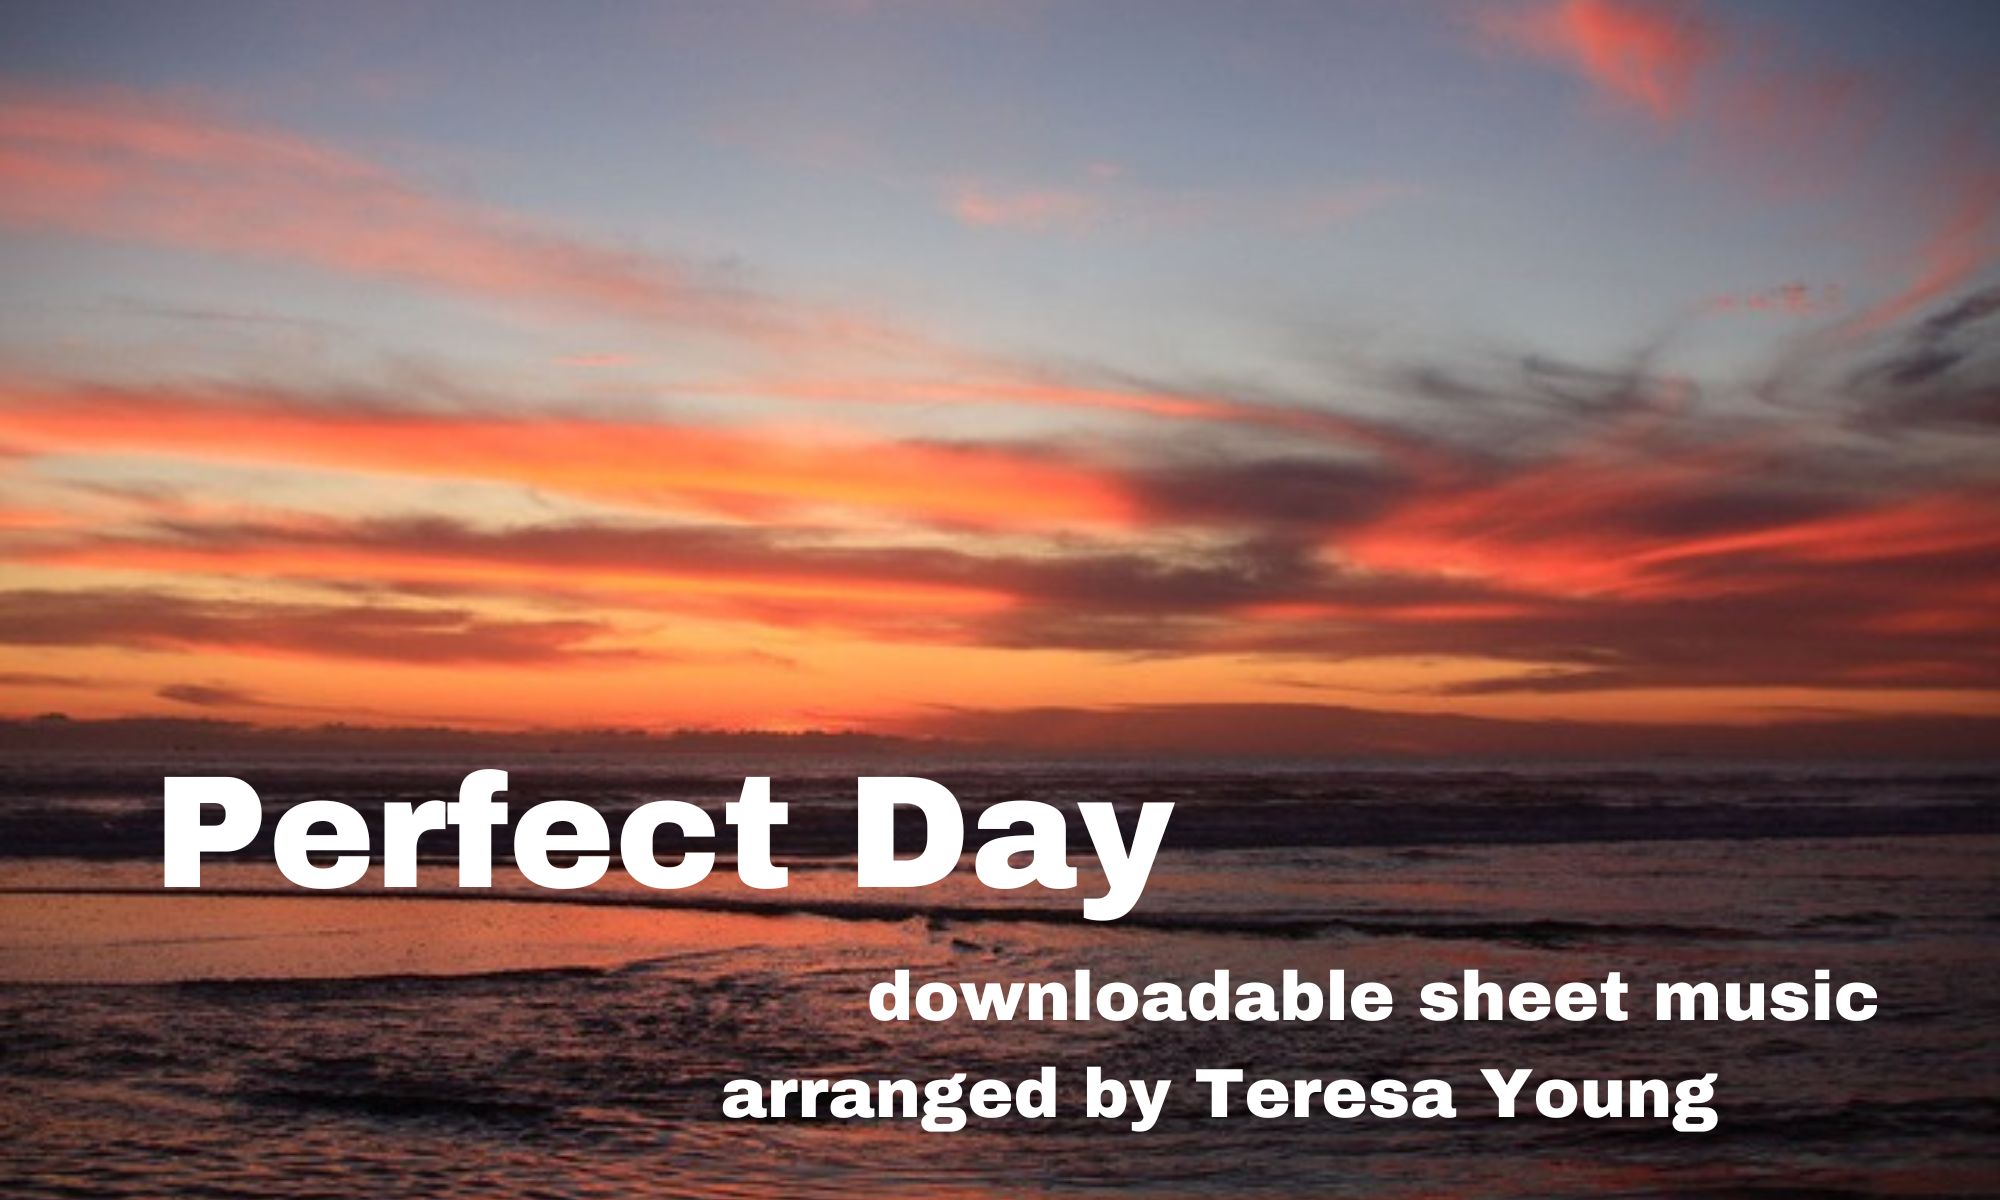 Lou Reed's Perfect Day piano solo, arr. Teresa Young